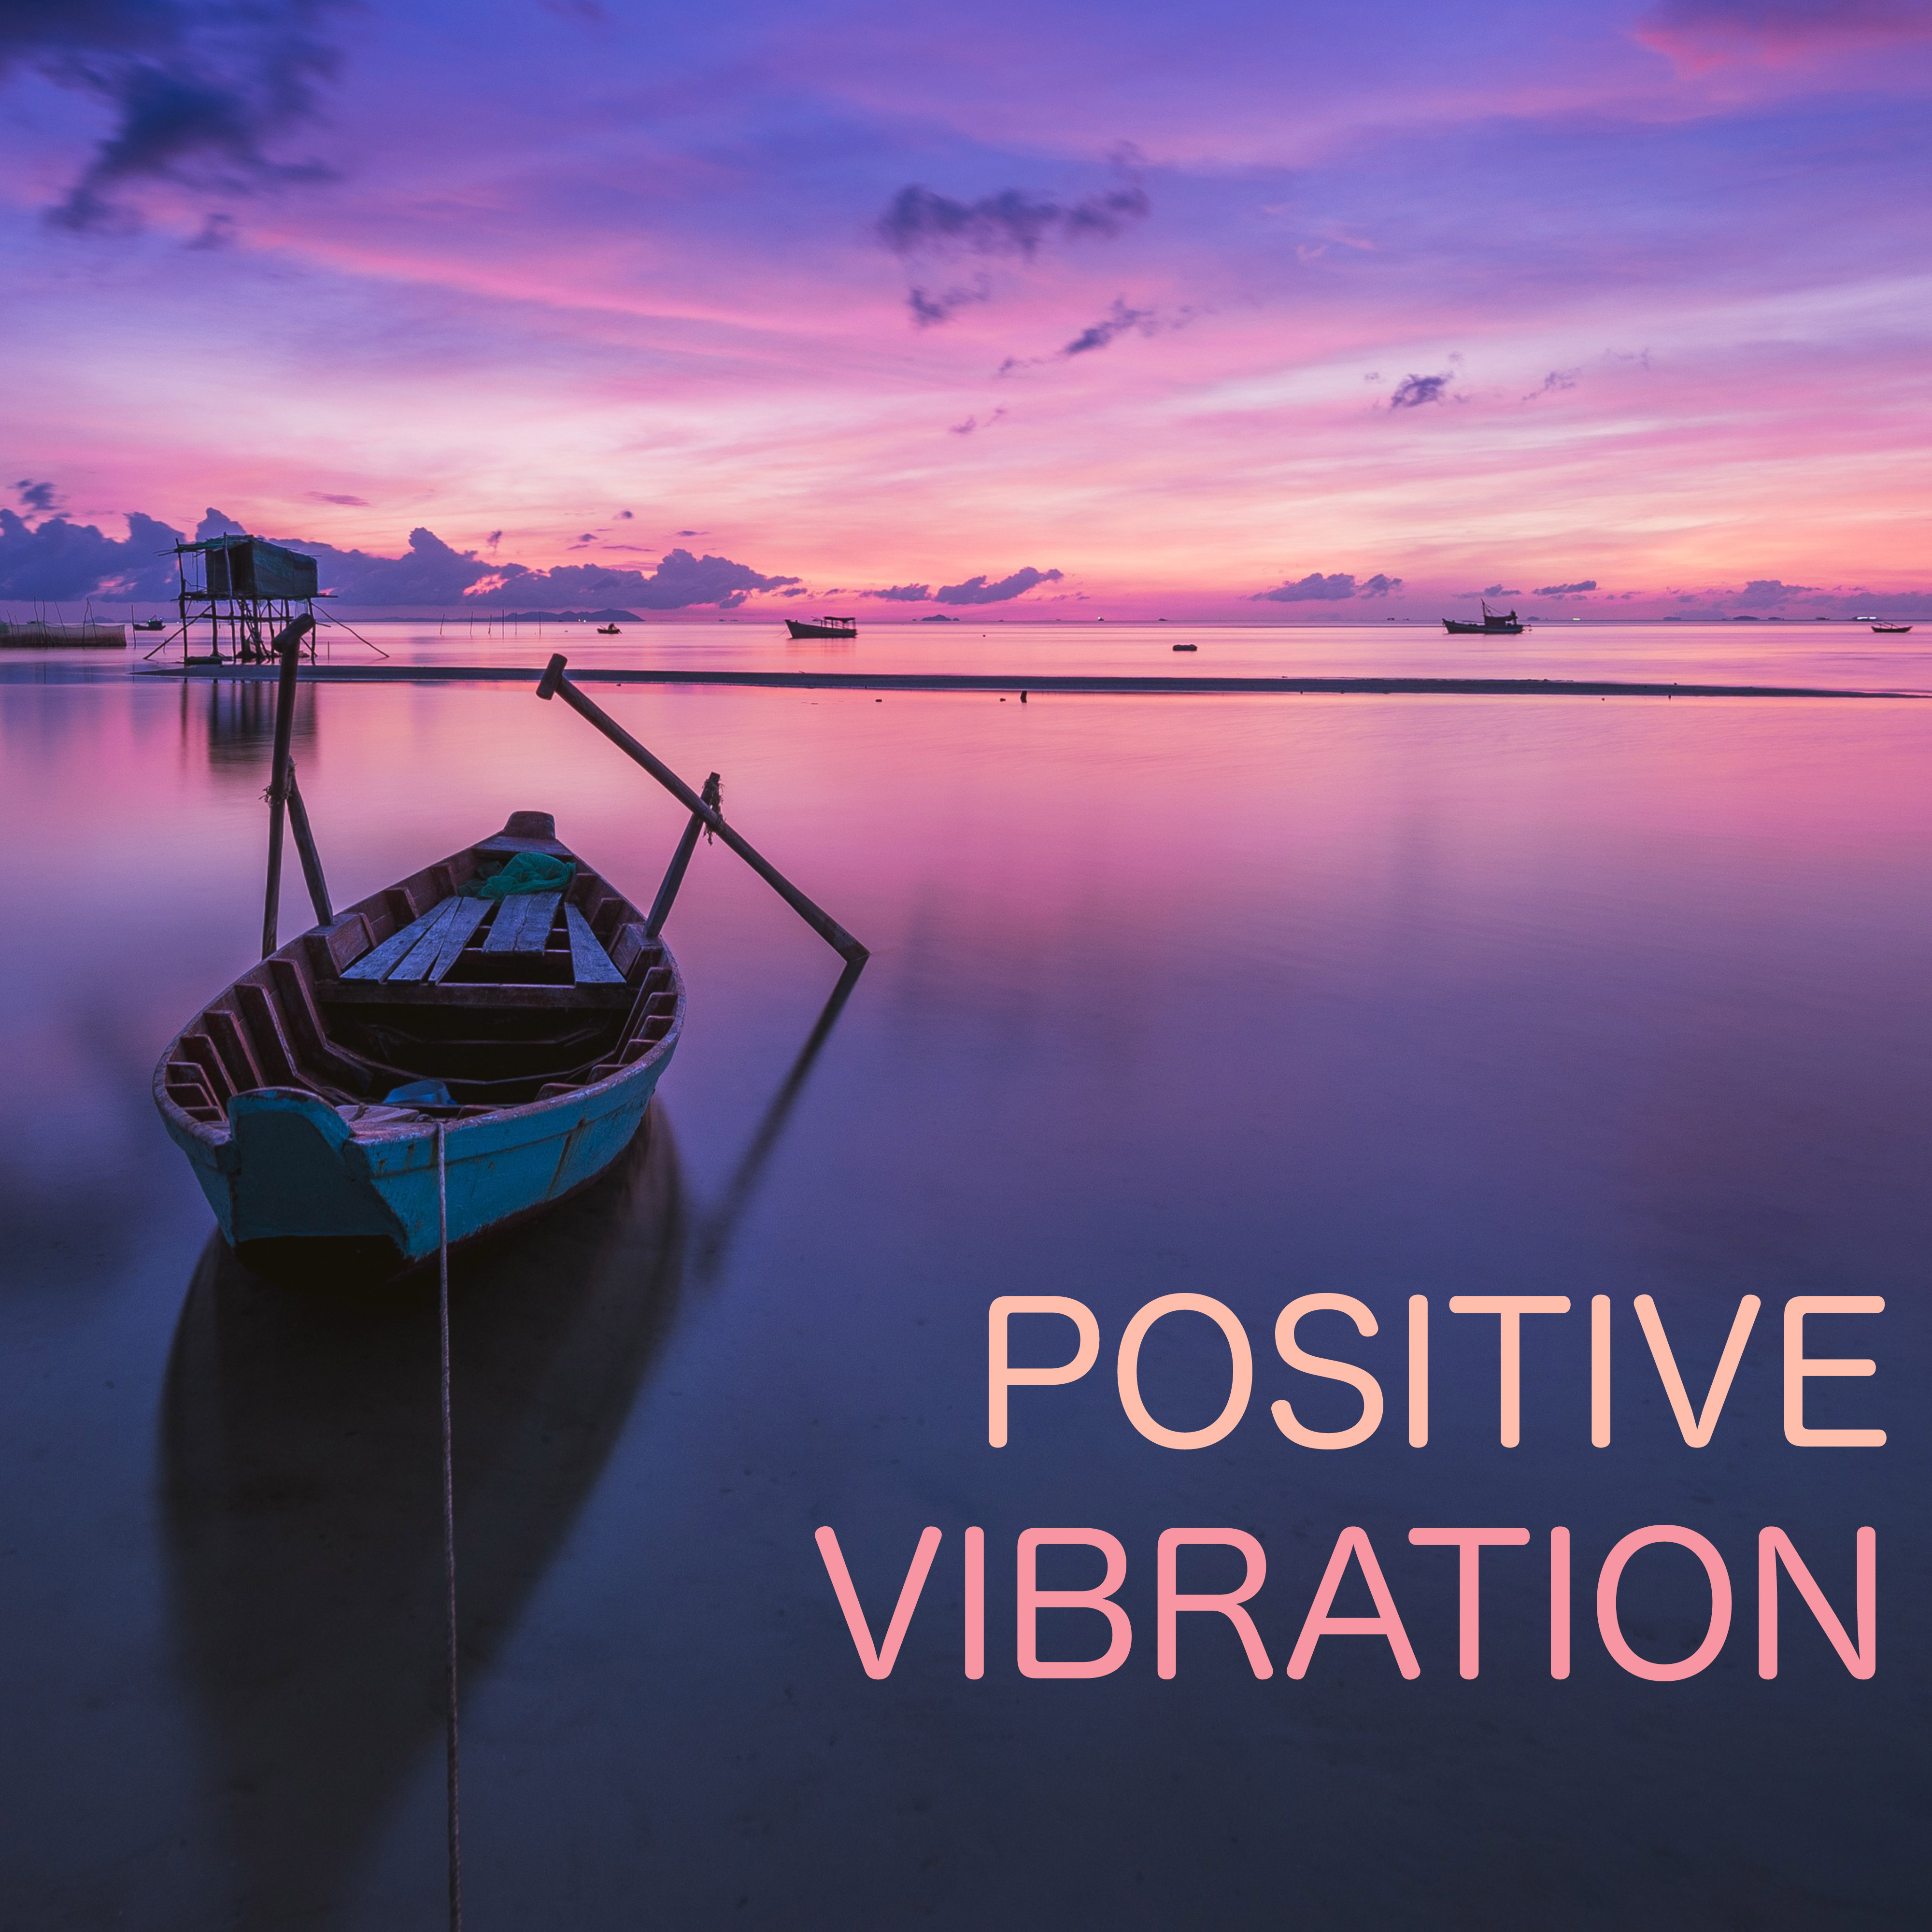 Positive Vibration - Hippie Sounds of Nature Songs for Relaxation and Ganja Yoga